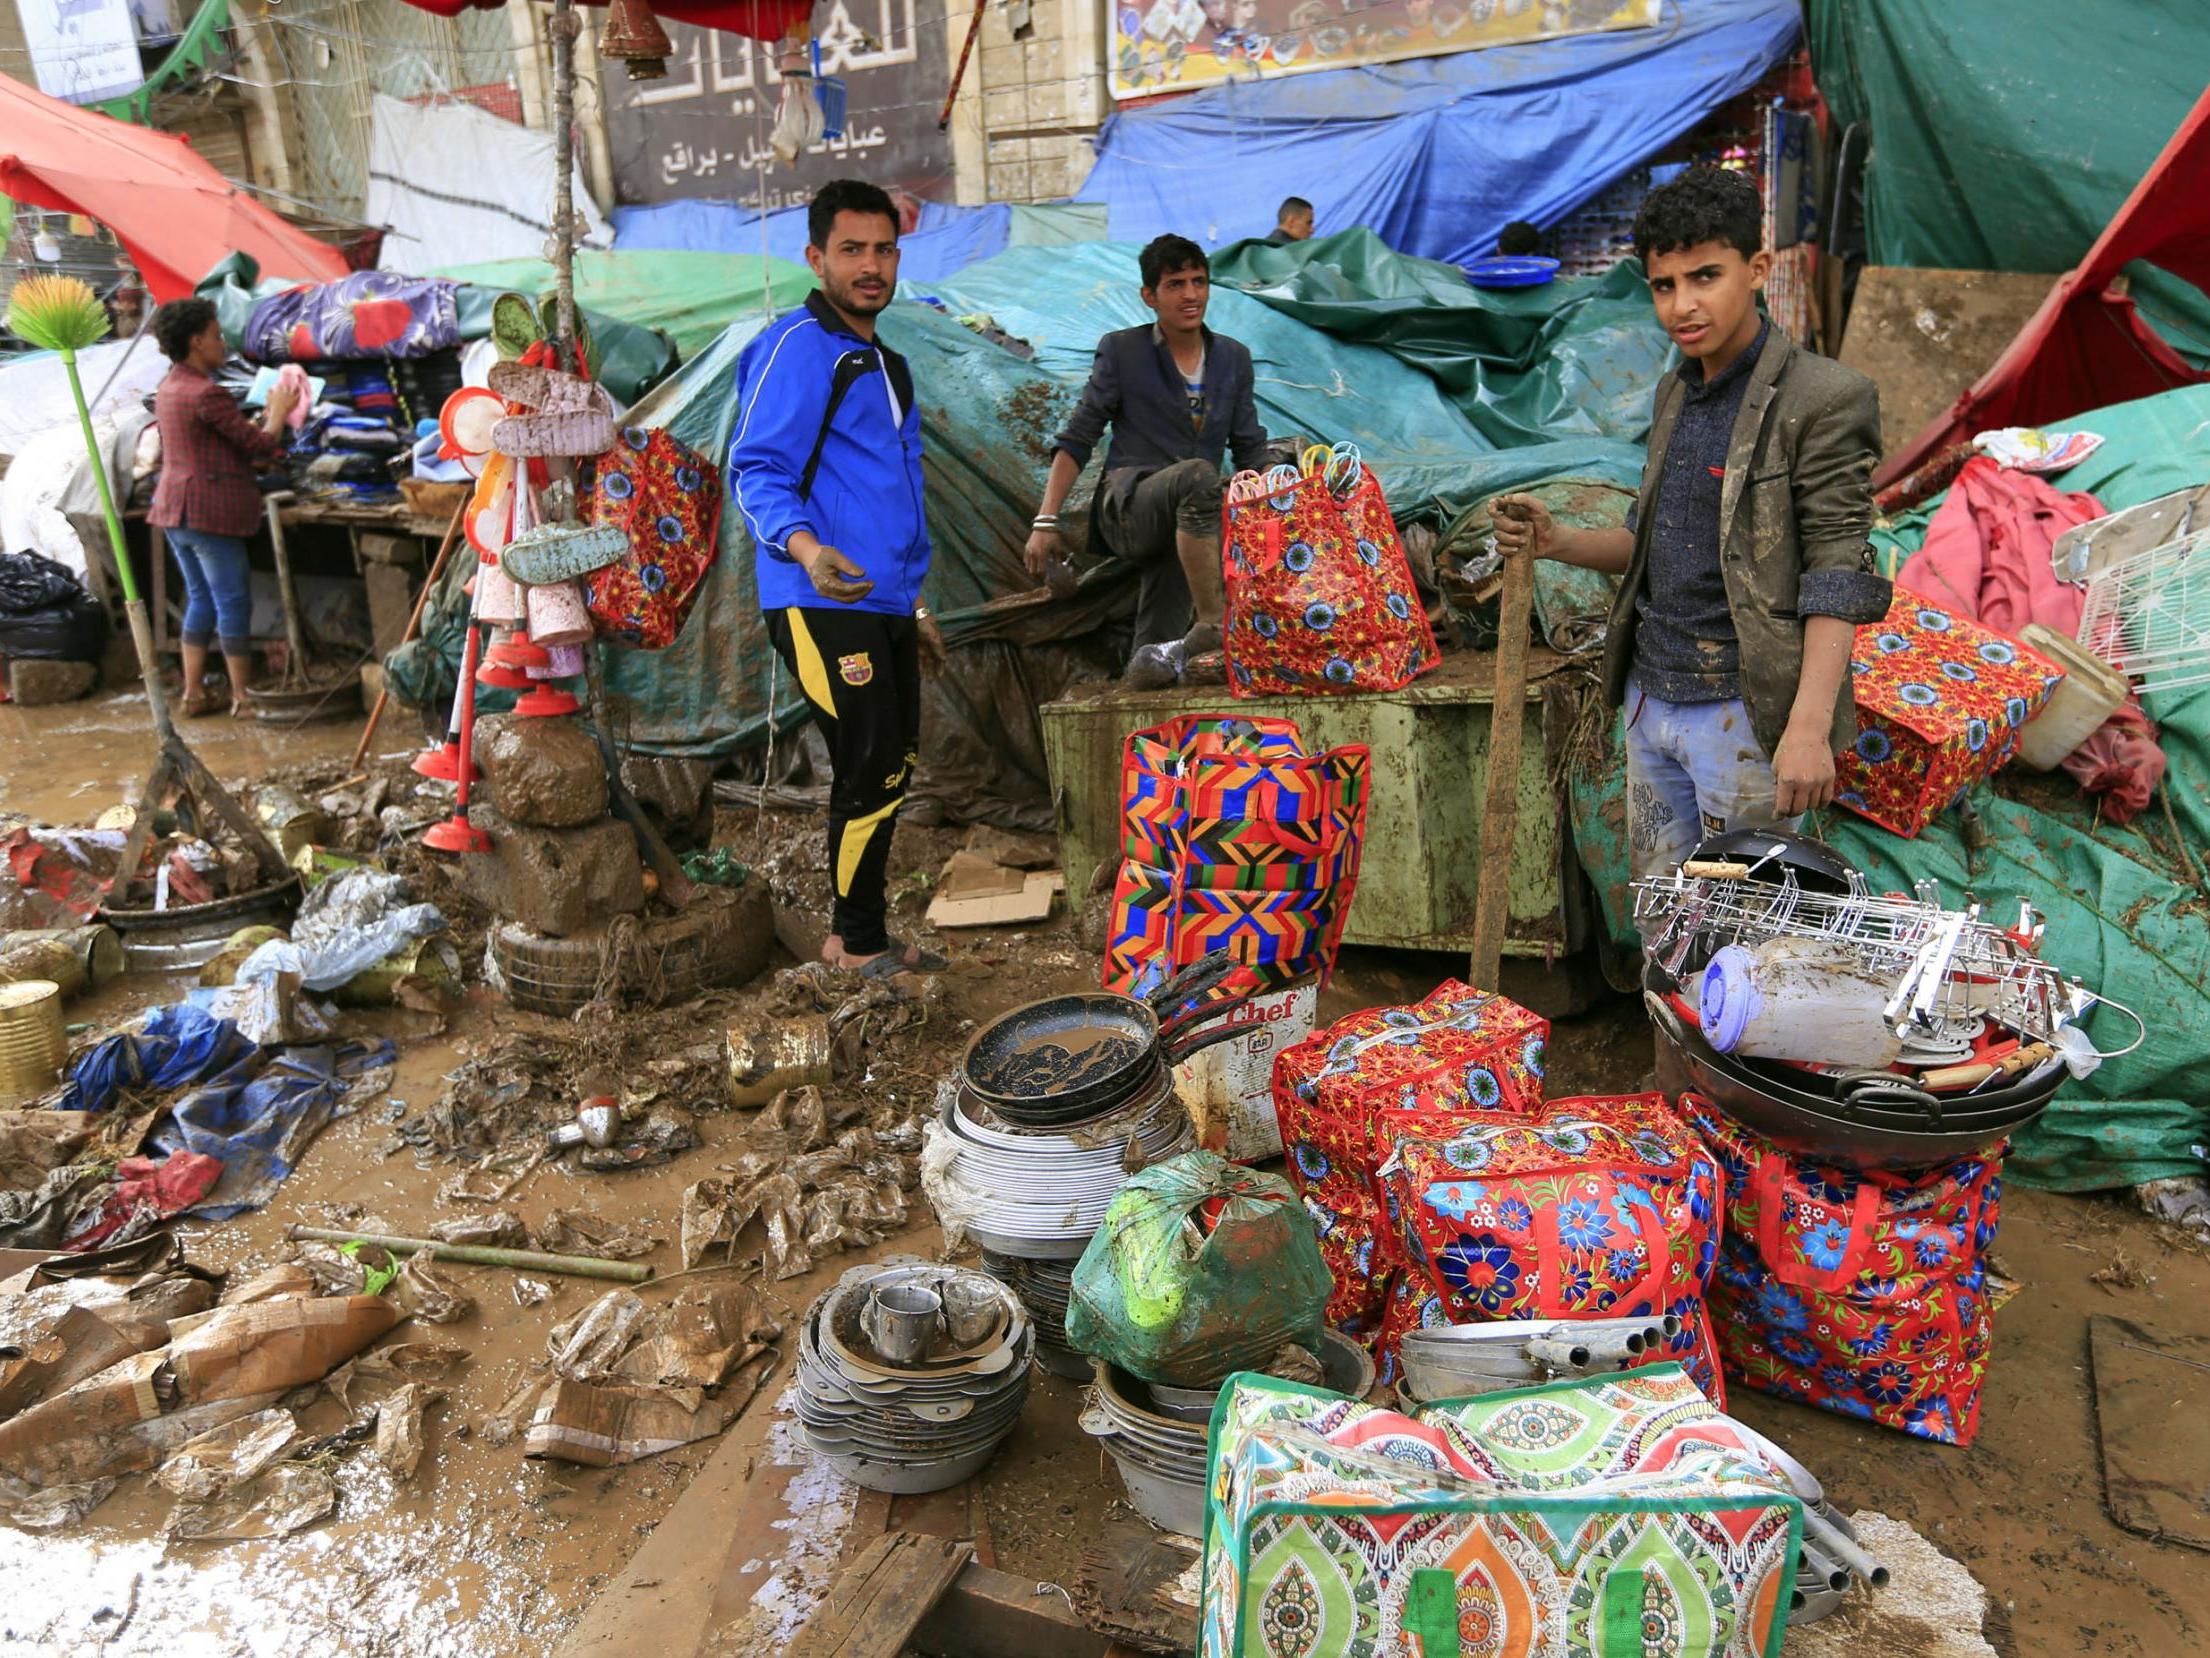 Yemenis salvage goods from a damaged vendor stall, flooded with mud following heavy rains in the capital Sanaa